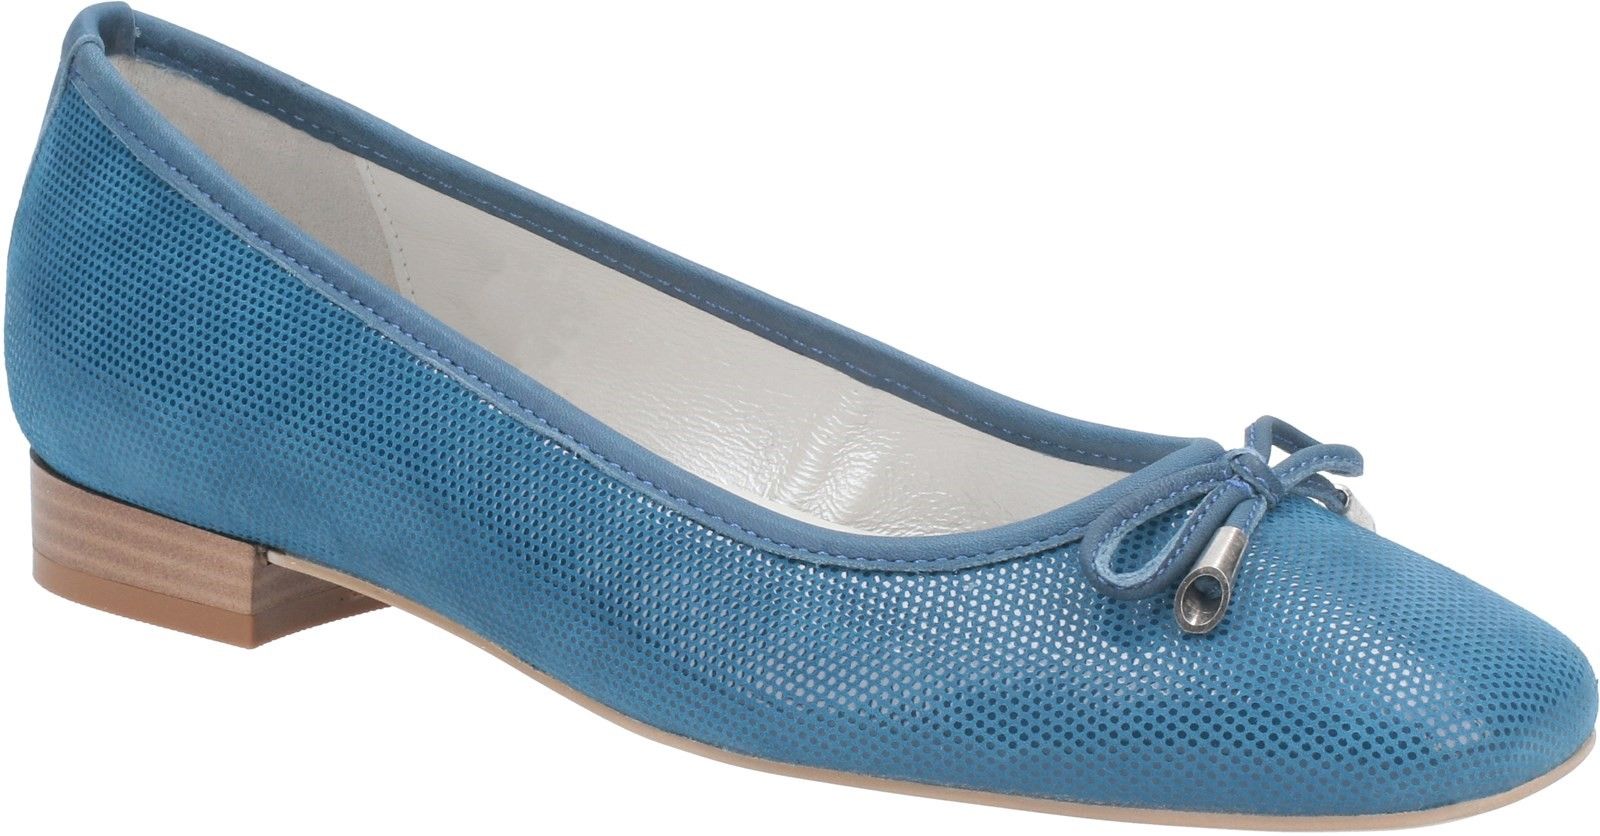 Riva Llafranc is a womens elegant slip on ballerina with decorative bow and toggle trim and square toe shape. It has soft printed suede leather uppers with contrast smooth leather topline and heel trim and a lightly padded leather covered footbed.